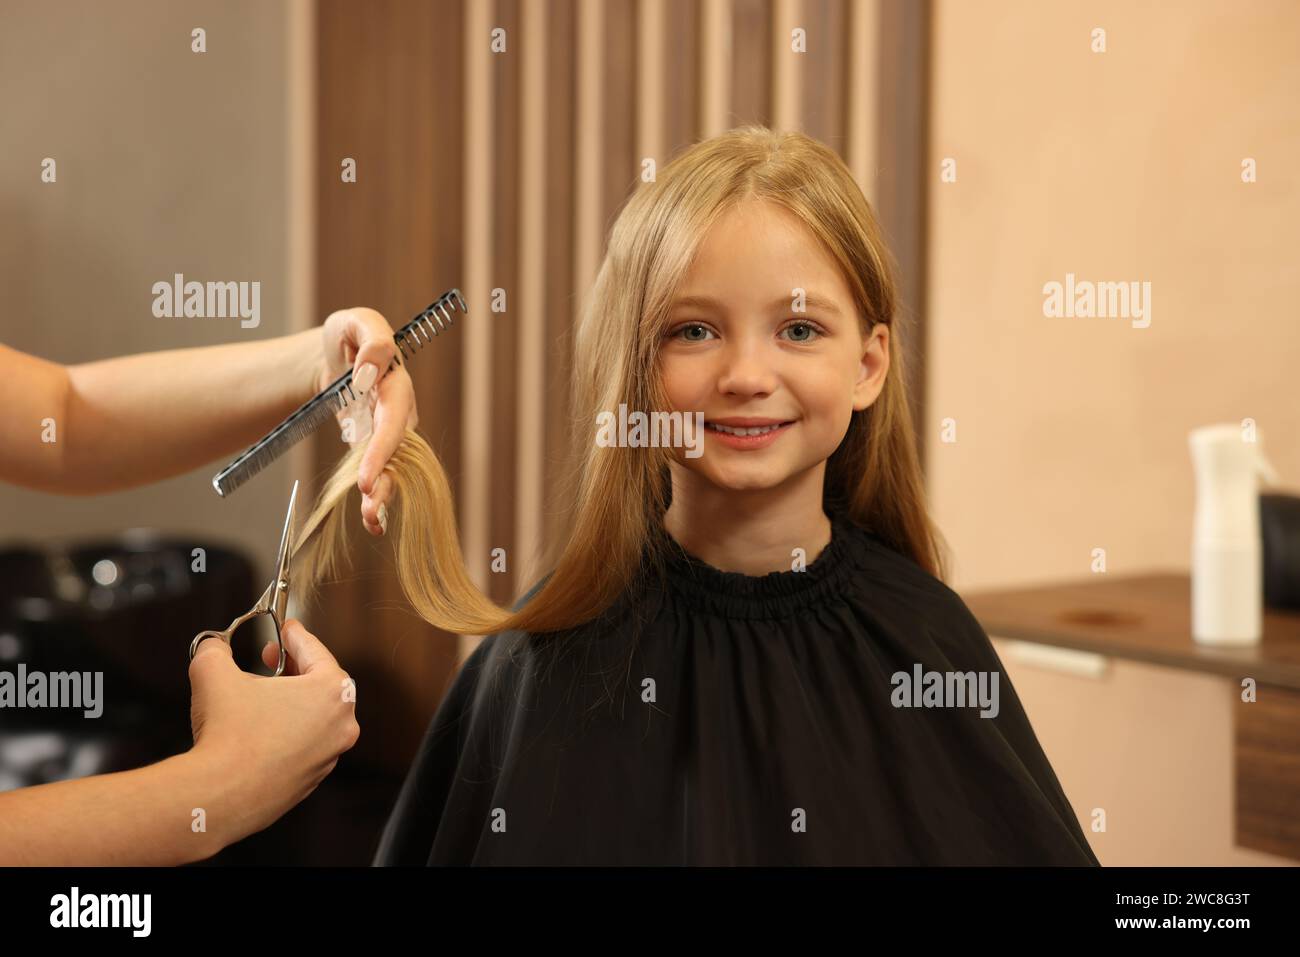 Professional hairdresser cutting girl's hair in beauty salon Stock ...